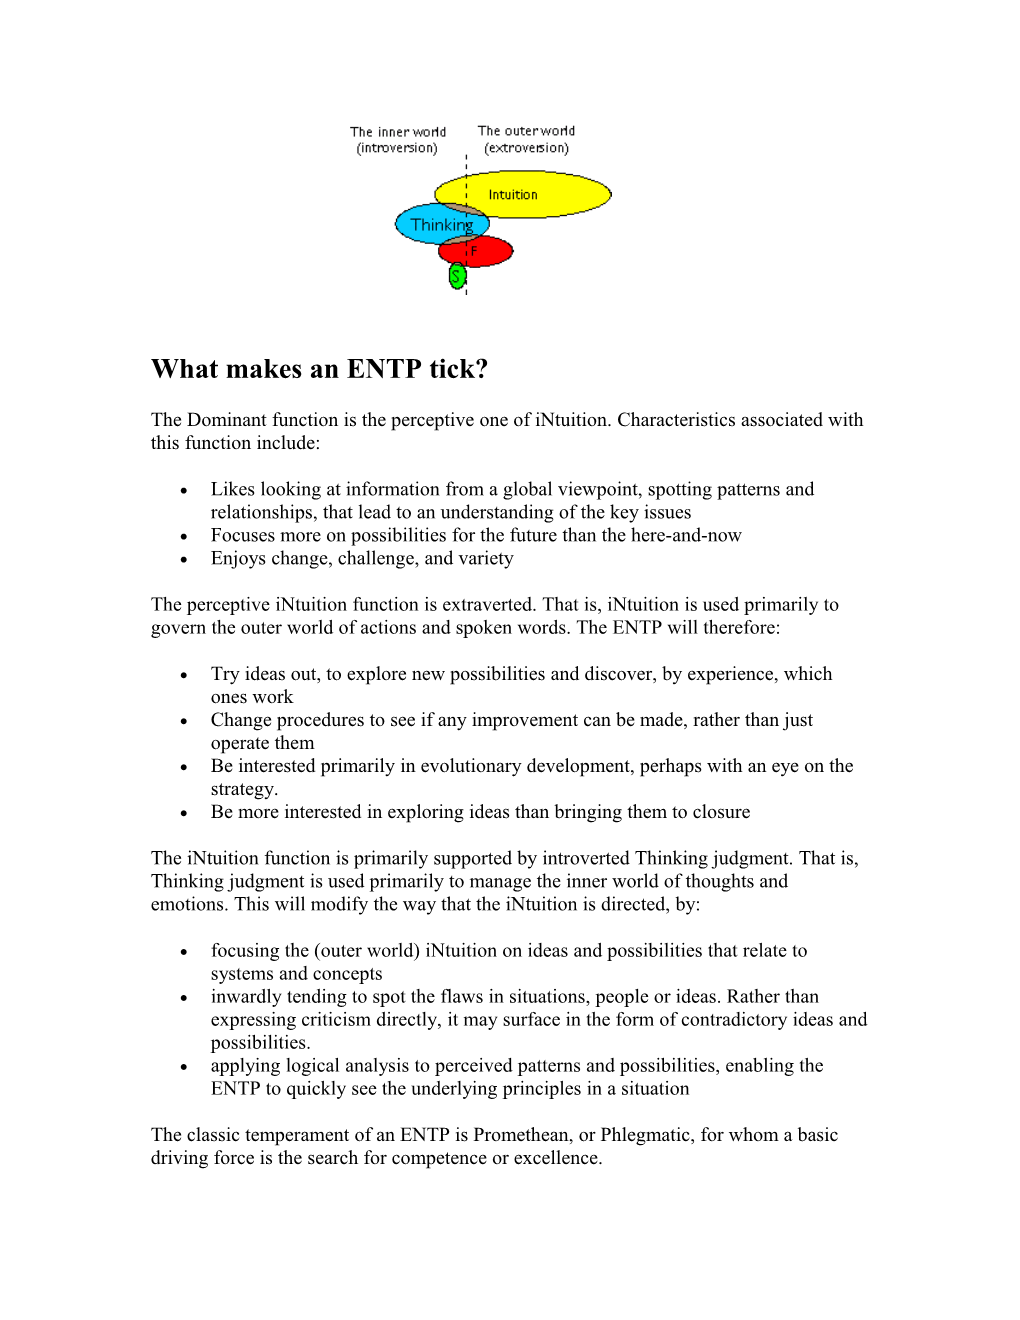 What Makes an ENTP Tick?